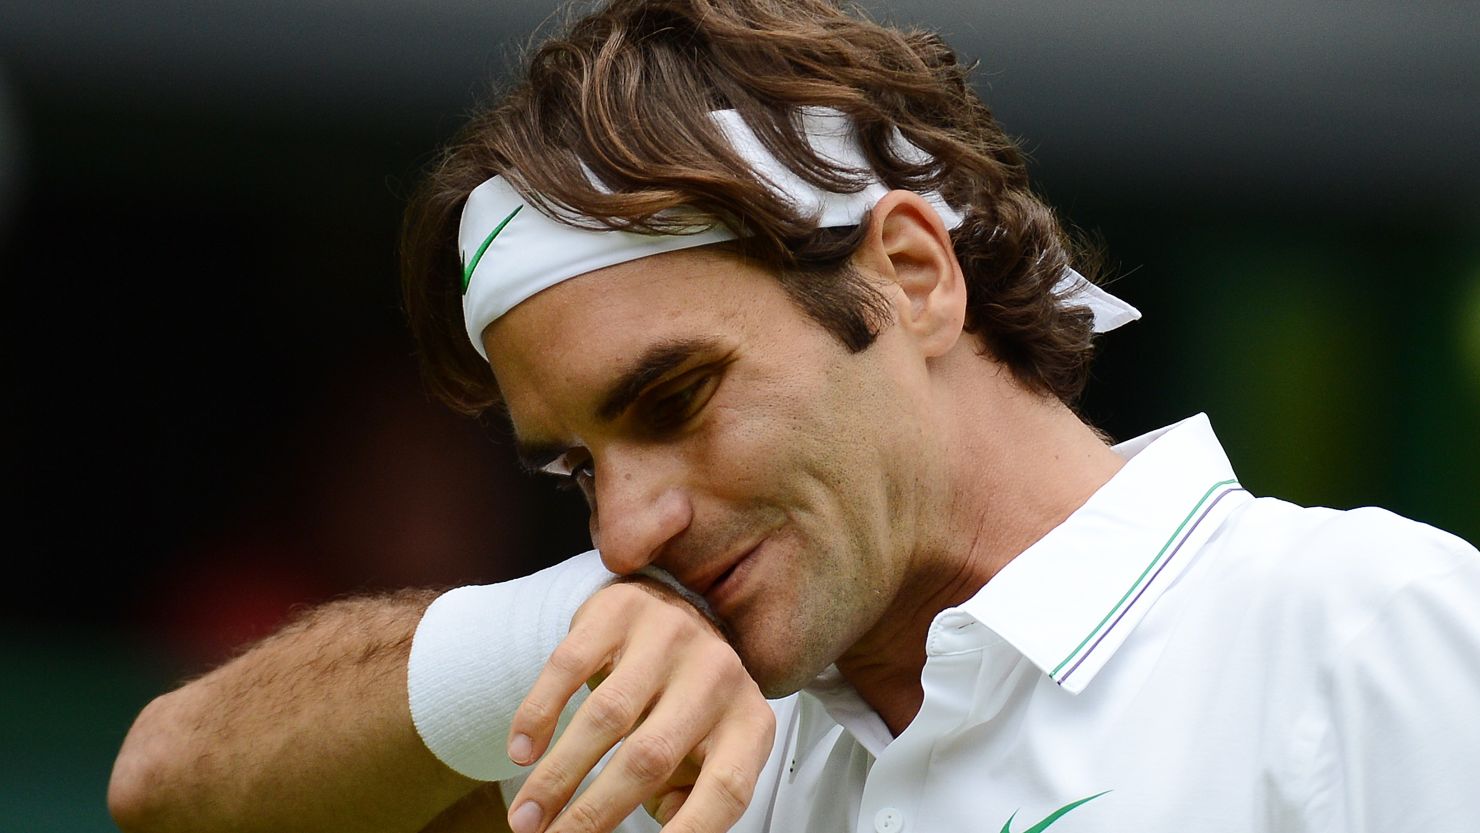 Roger Federer hardly had to break sweat as he cruised past Italy's Fabio Fognini on day three at Wimbledon.